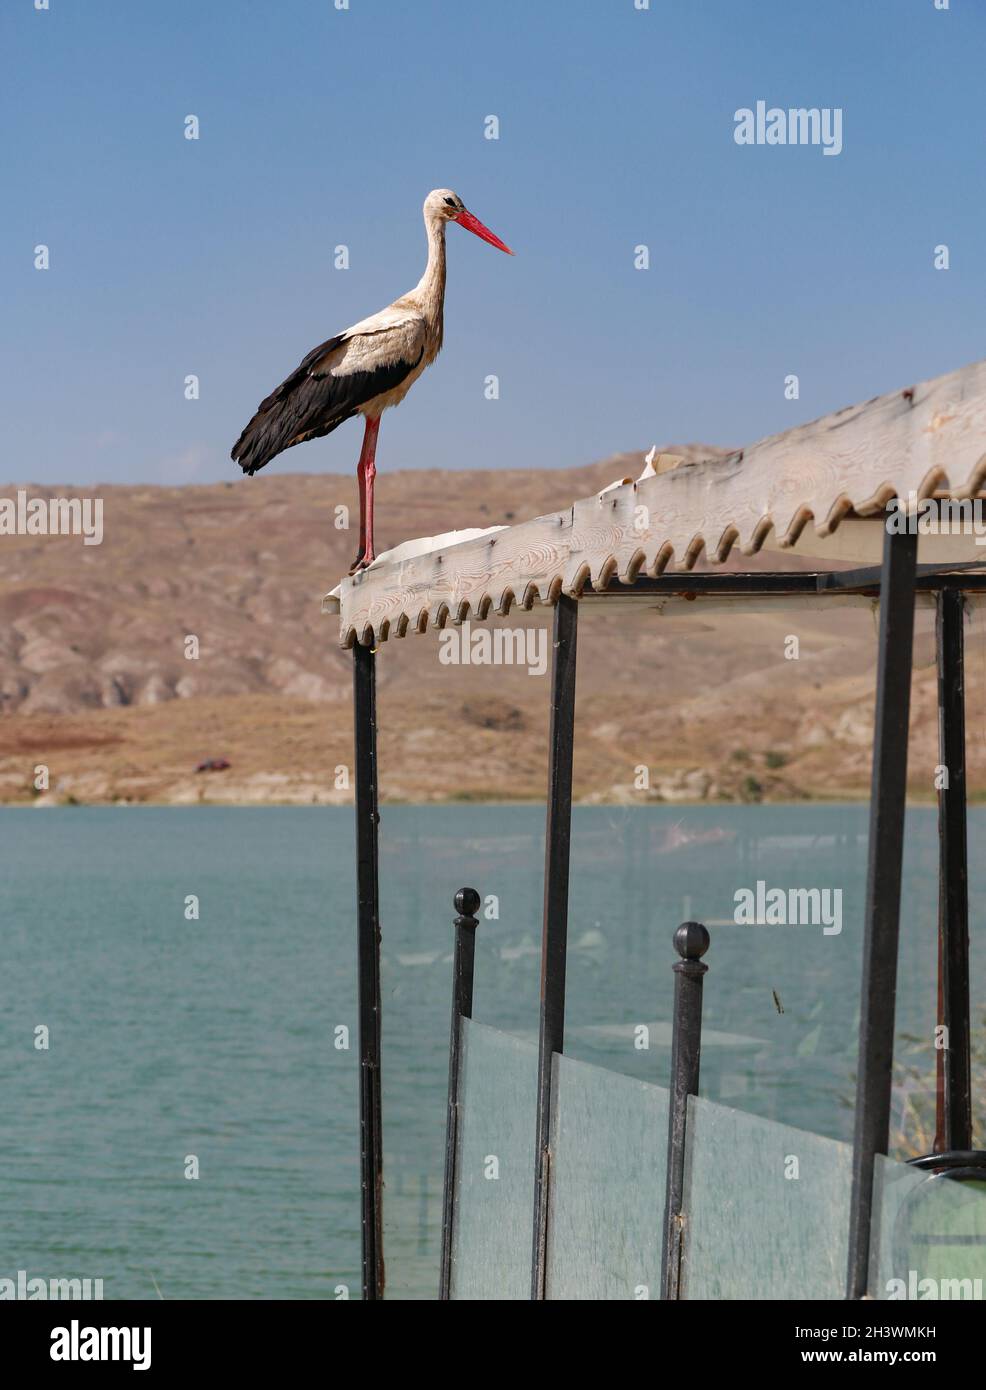 Young stork perched on the roof of a shed by a lake. Stock Photo